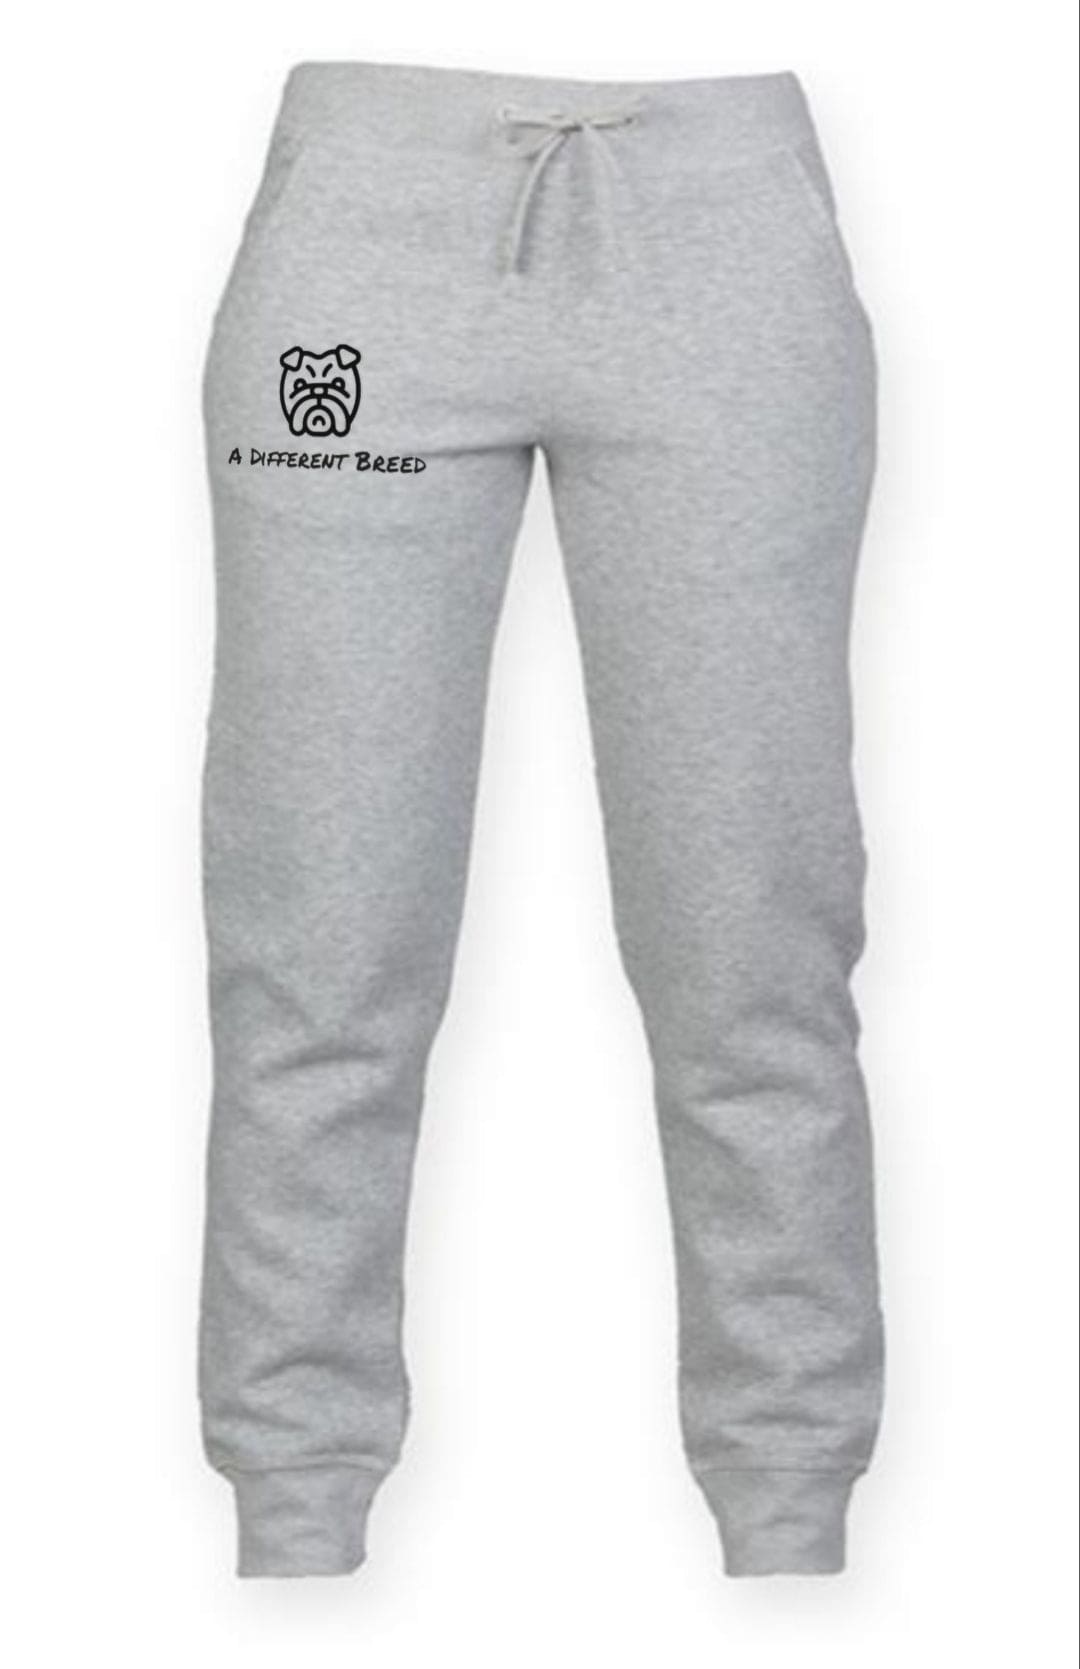 grey jogging bottoms with a cuff bottom and the a different breed logo in black print